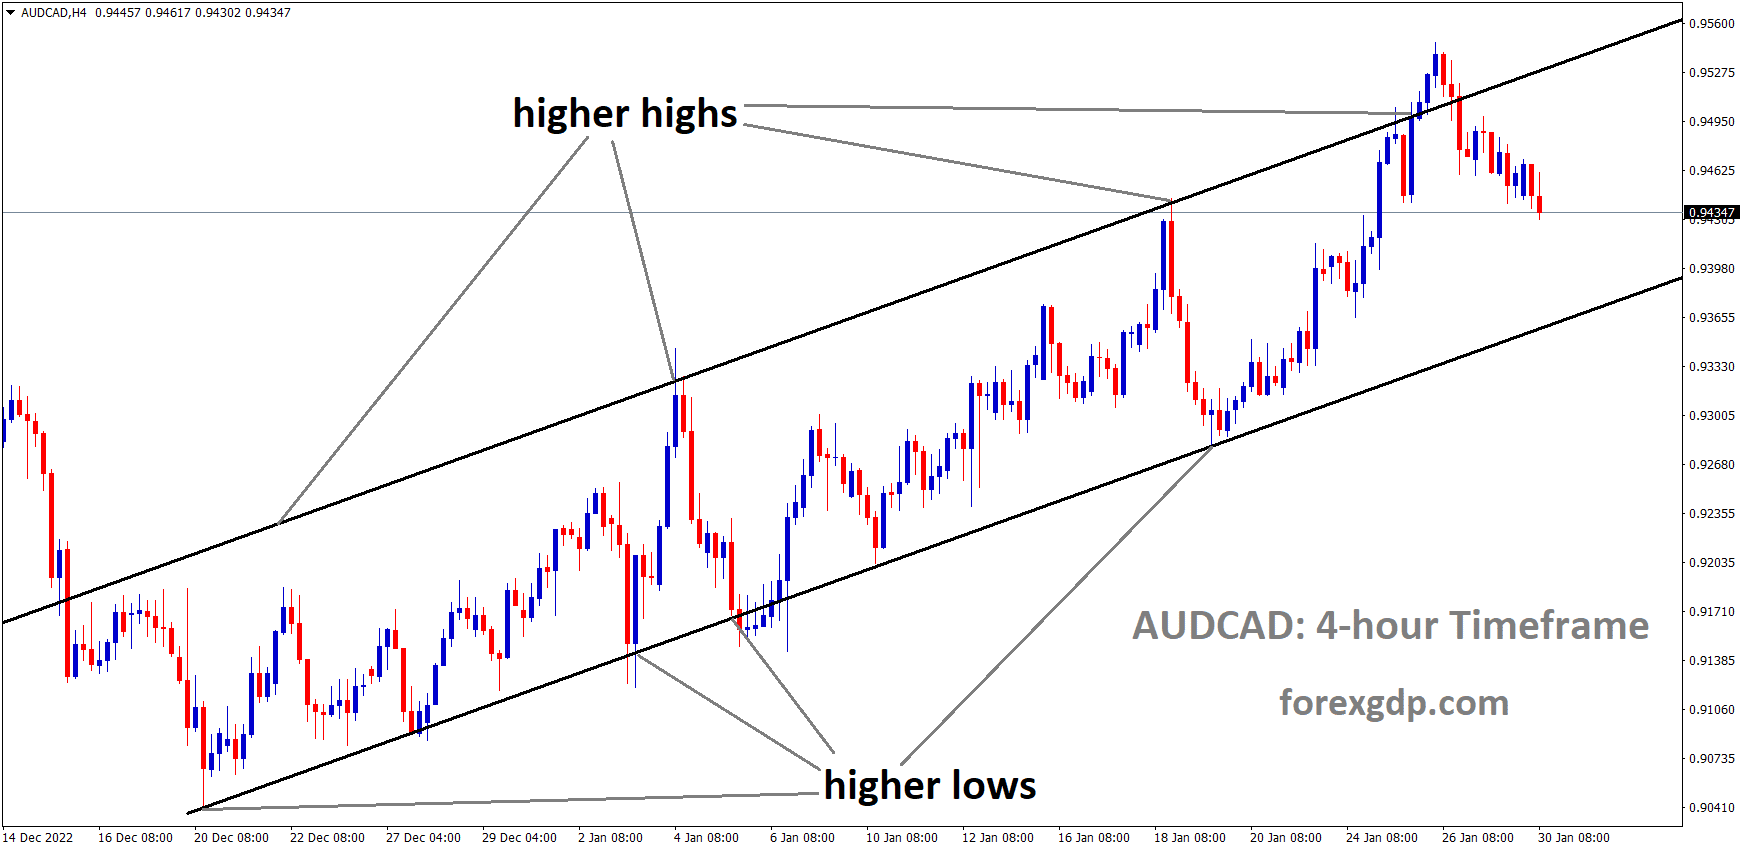 AUDCAD is moving in an Ascending channel and the market has fallen from the higher high area of the channel